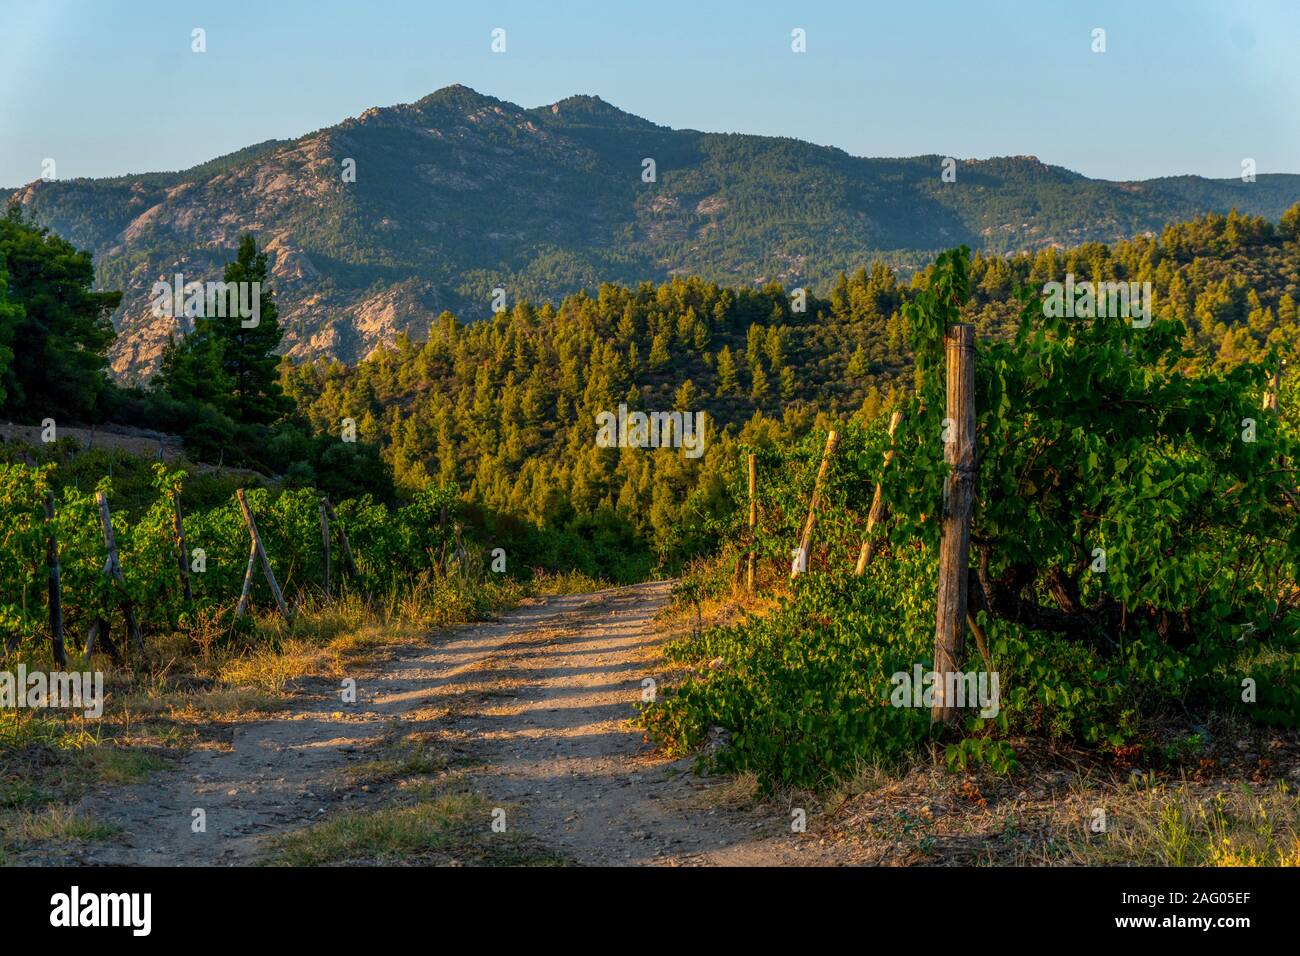 Road and green mountains in Greece horizontal Stock Photo